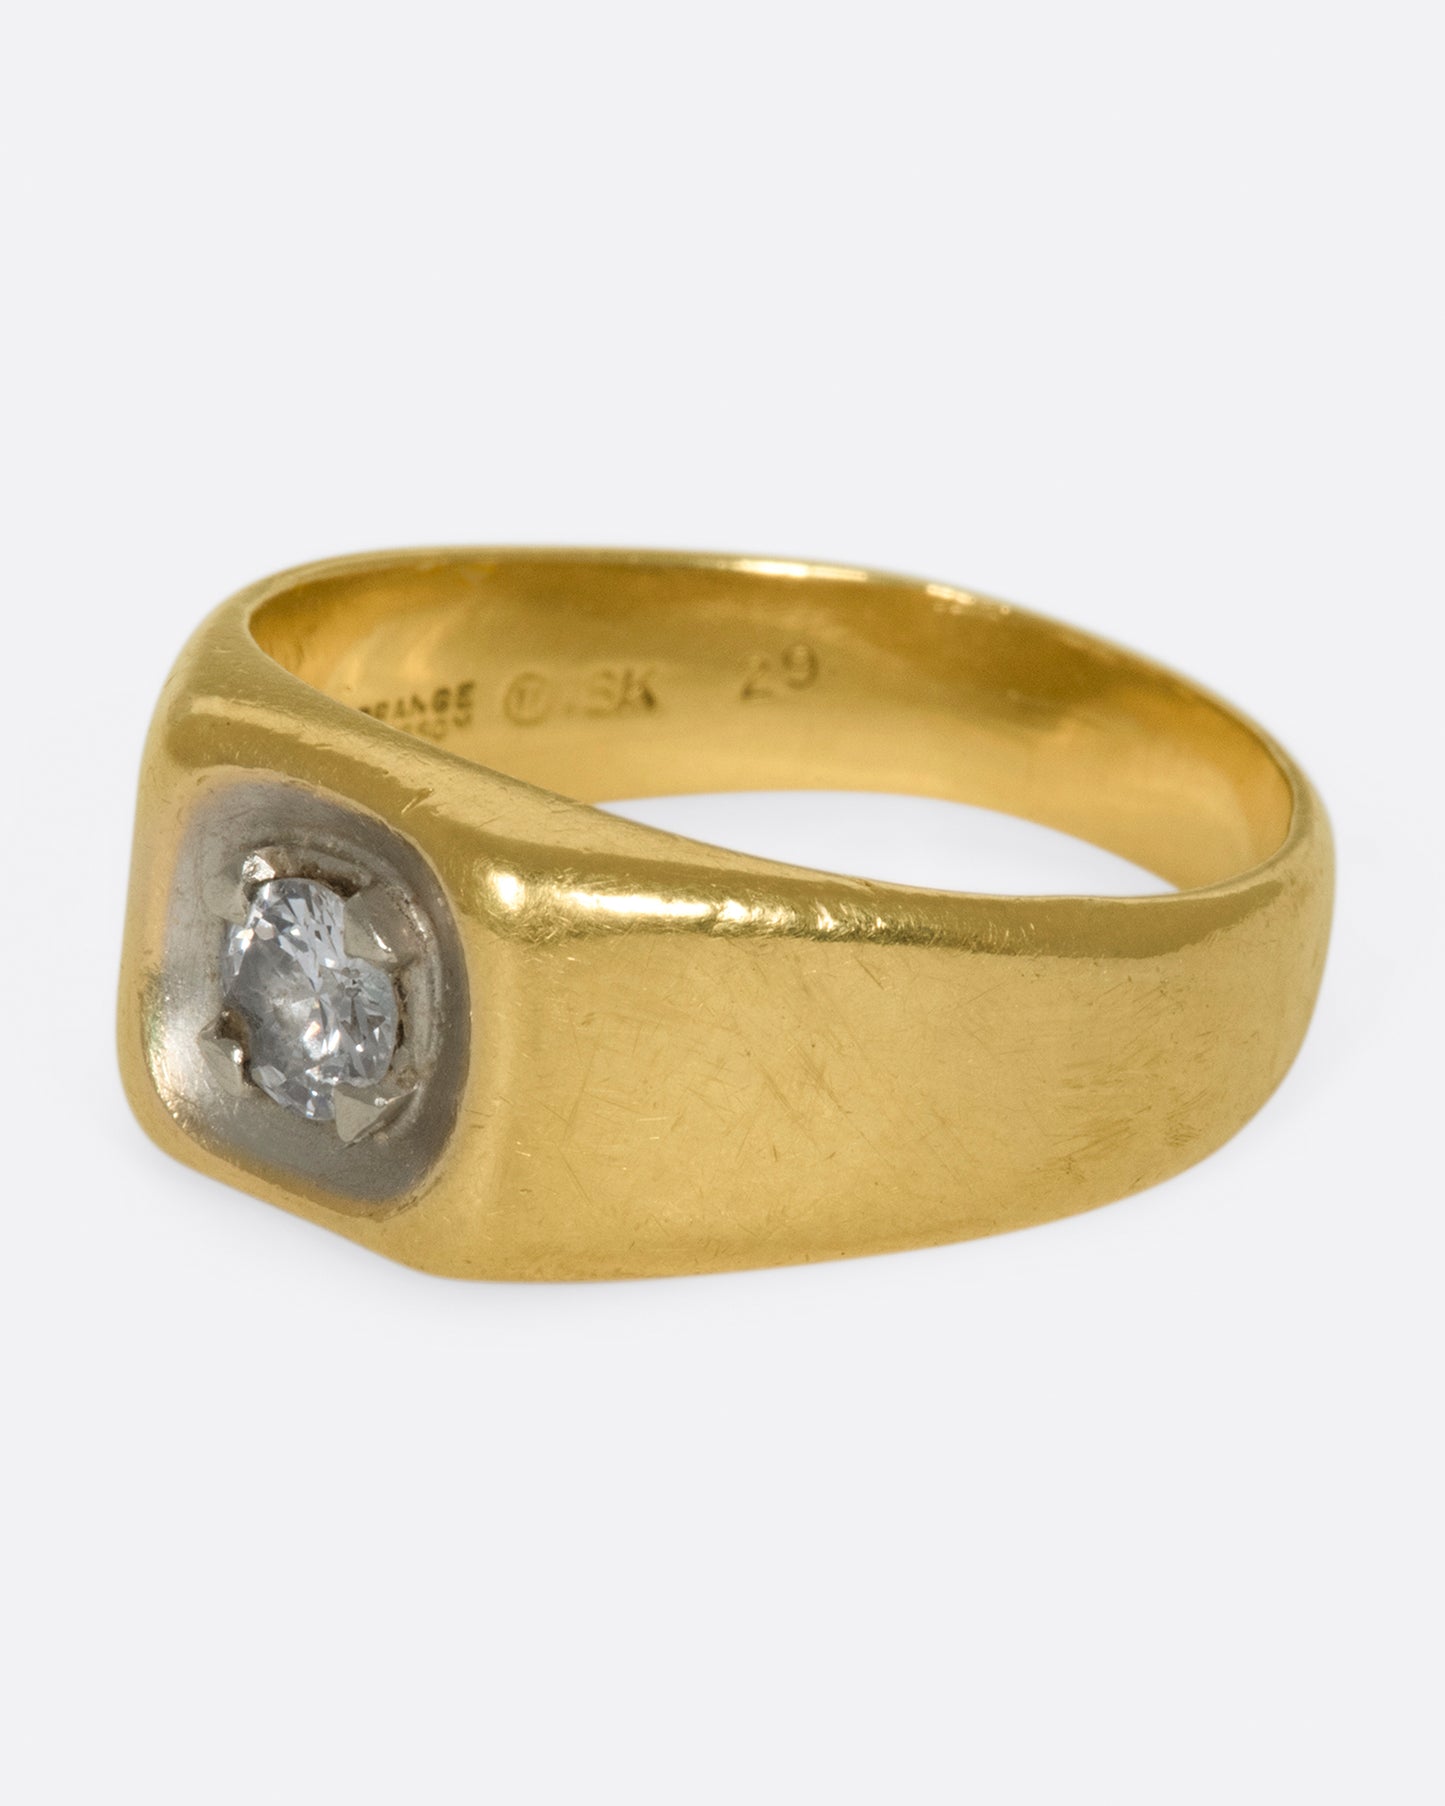 A vintage gold signet ring with a sunken diamond at its center.